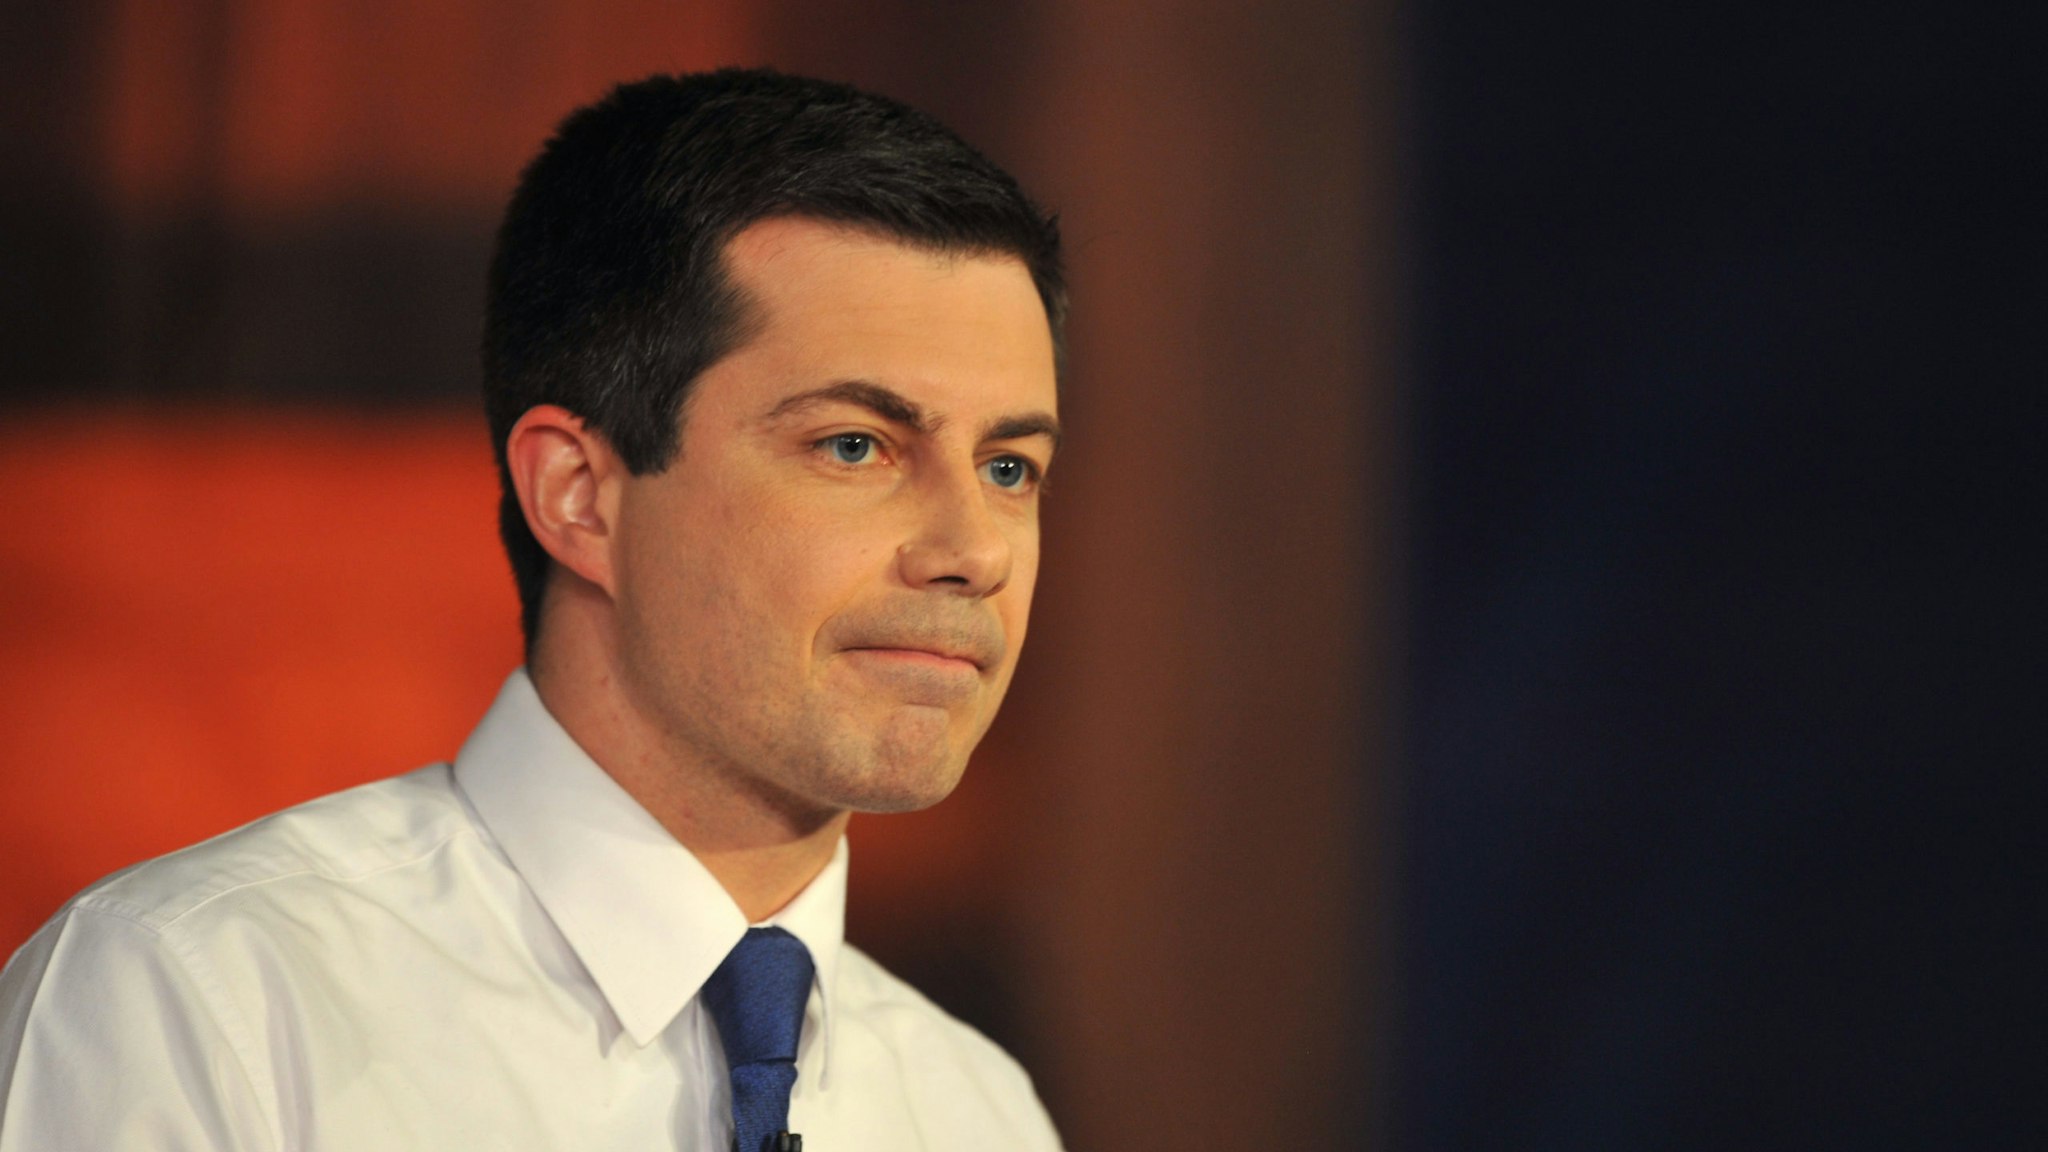 DES MOINES, IA - JANUARY 26: Democratic presidential candidate Mayor Pete Buttigieg is interviewed by moderator Chris Wallace during a FOX News Channel Town Hall at the River Center in Des Moines, Iowa on January 26, 2020 in Des Moines, Iowa. Buttigieg and other candidates are making their final pleas to the voters of Iowa with the caucus just days away. The Iowa caucuses will be held in eight days on February 3.